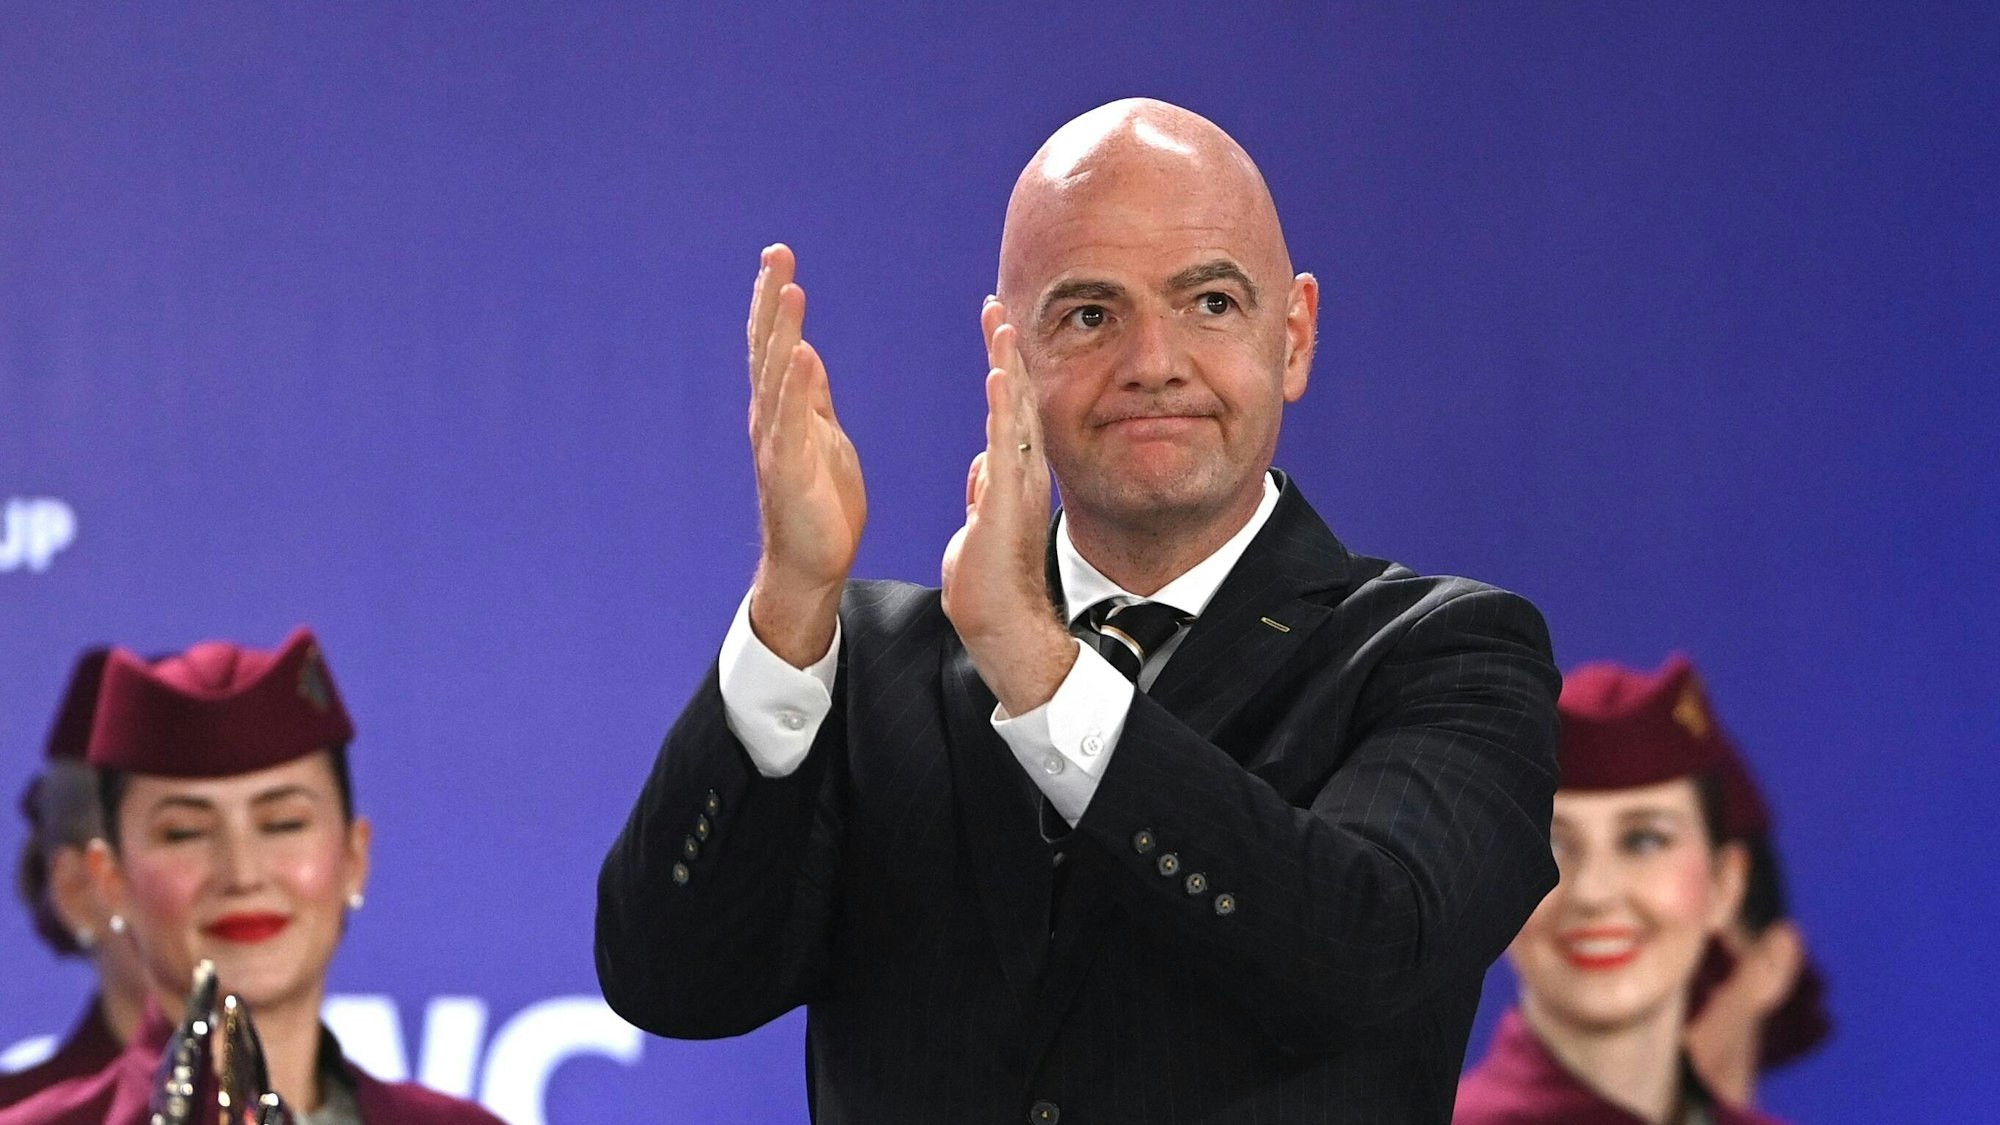 6636941 29.08.2021 FIFA President Gianni Infantino claps during the award ceremony of the Beach Soccer World Cup 2021 winners, in Moscow, Russia. Alexey Filippov / Sputnik Russia Beach Soccer World Cup RFU - Japan PUBLICATIONxINxGERxSUIxAUTxONLY d80253e102bd2285 